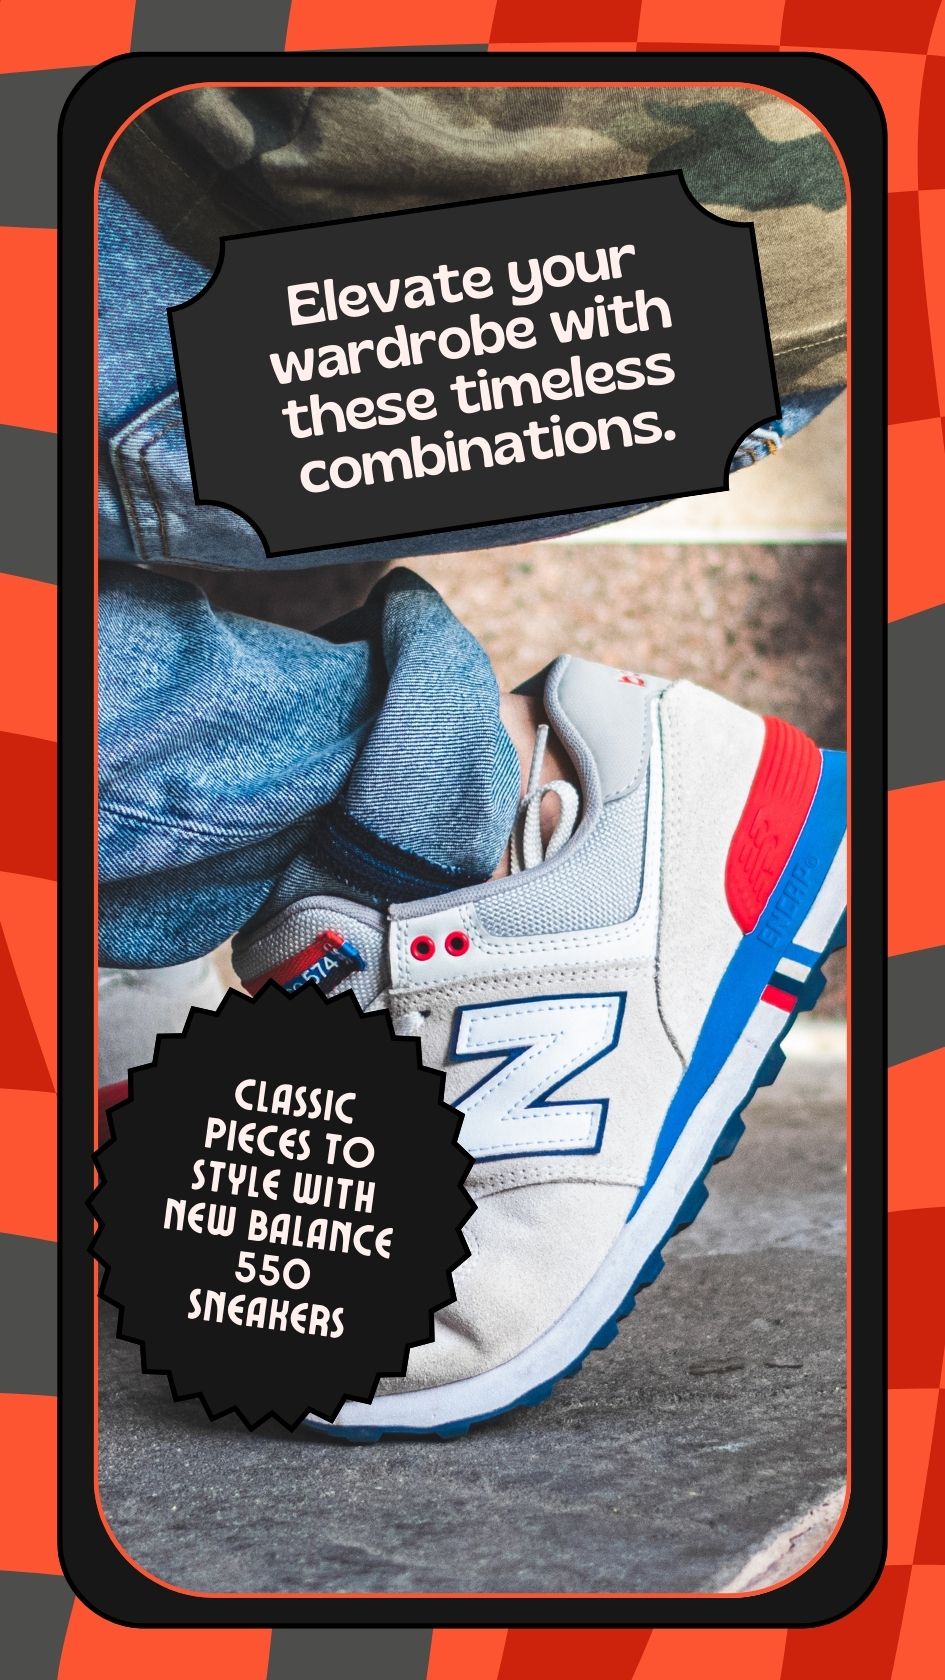 How to Style the New Balance 550 Sneakers with Classic Pieces